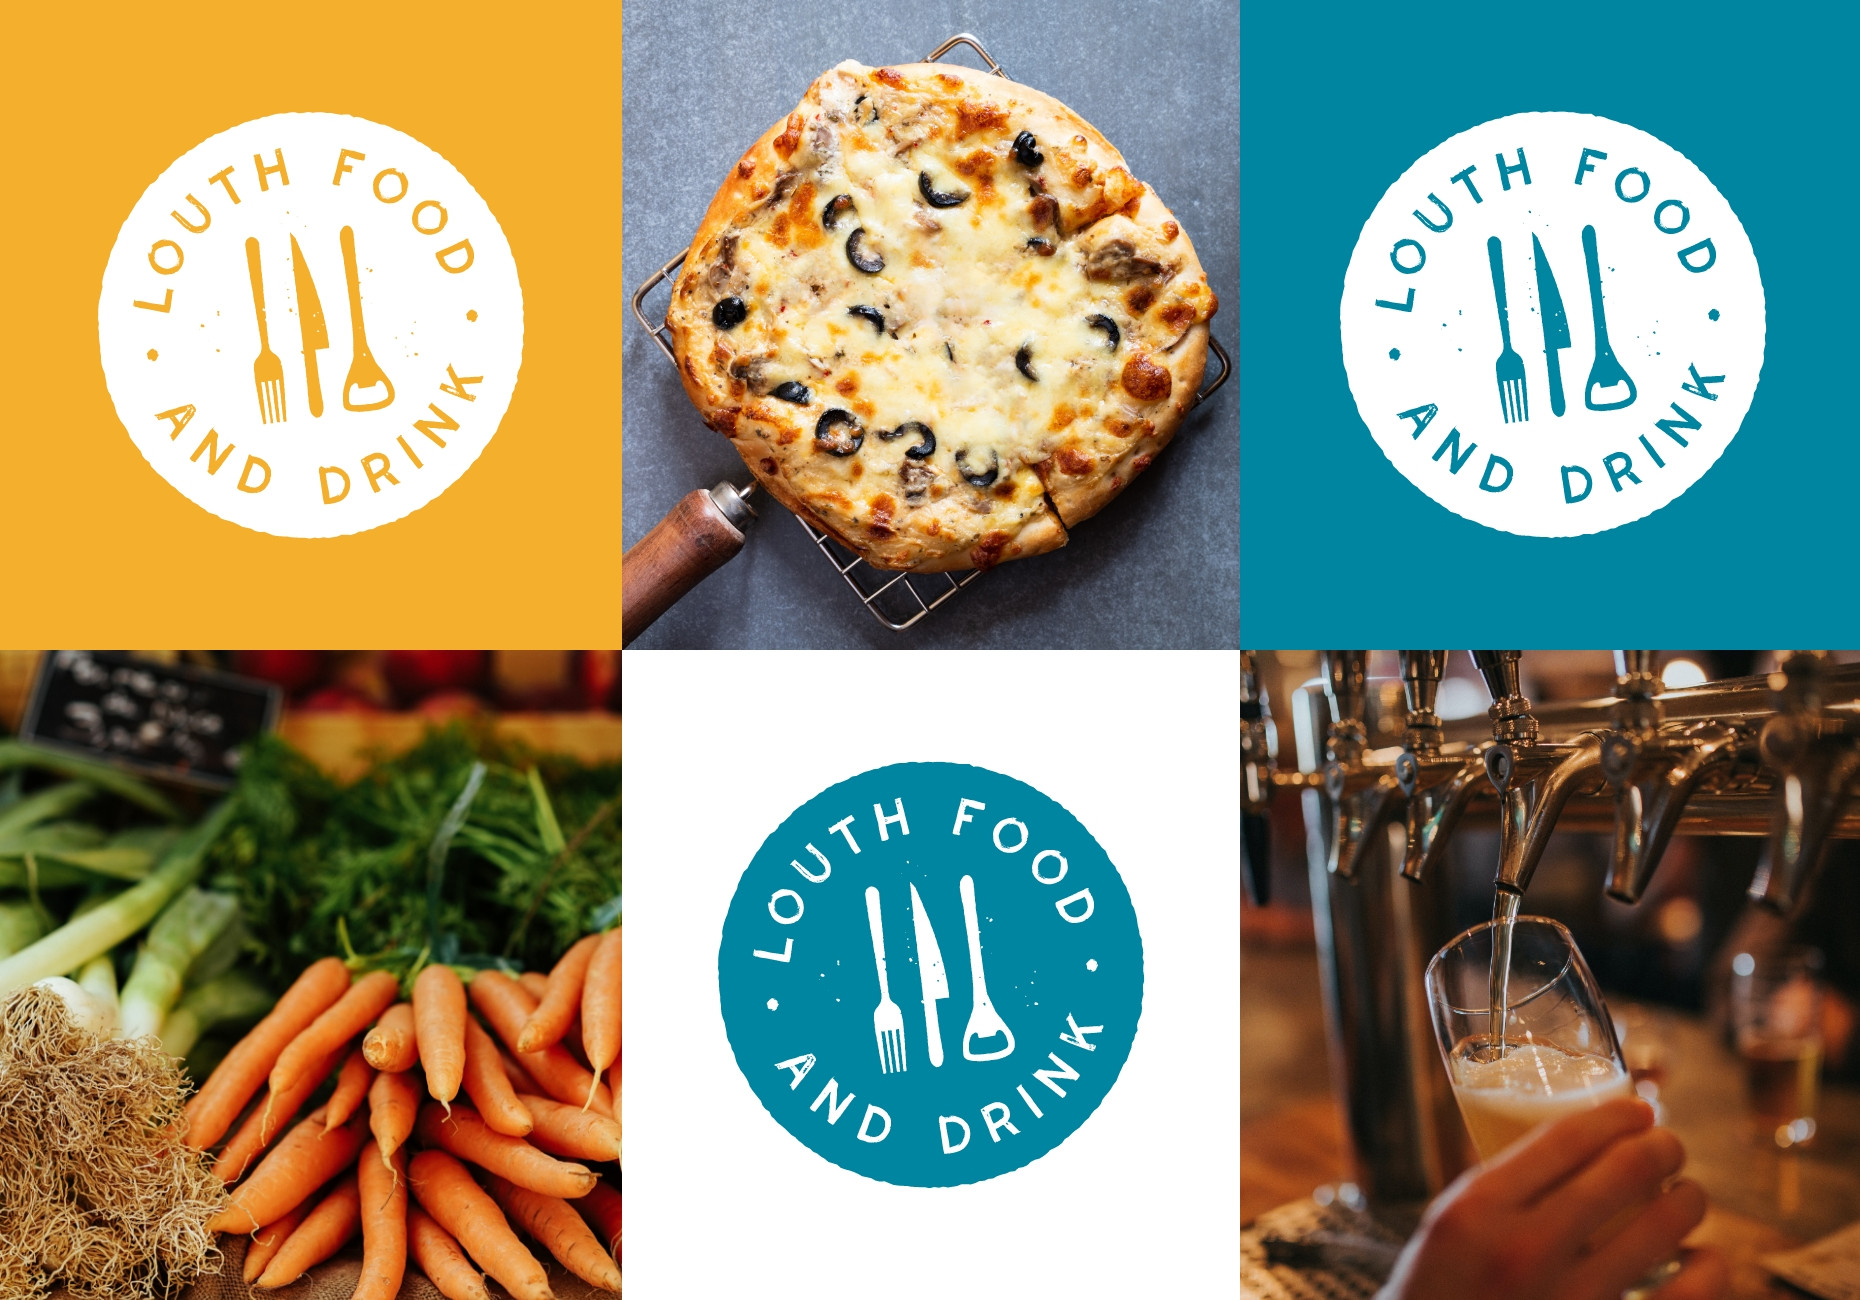 illustrated logo design for Louth food and drink festival trail